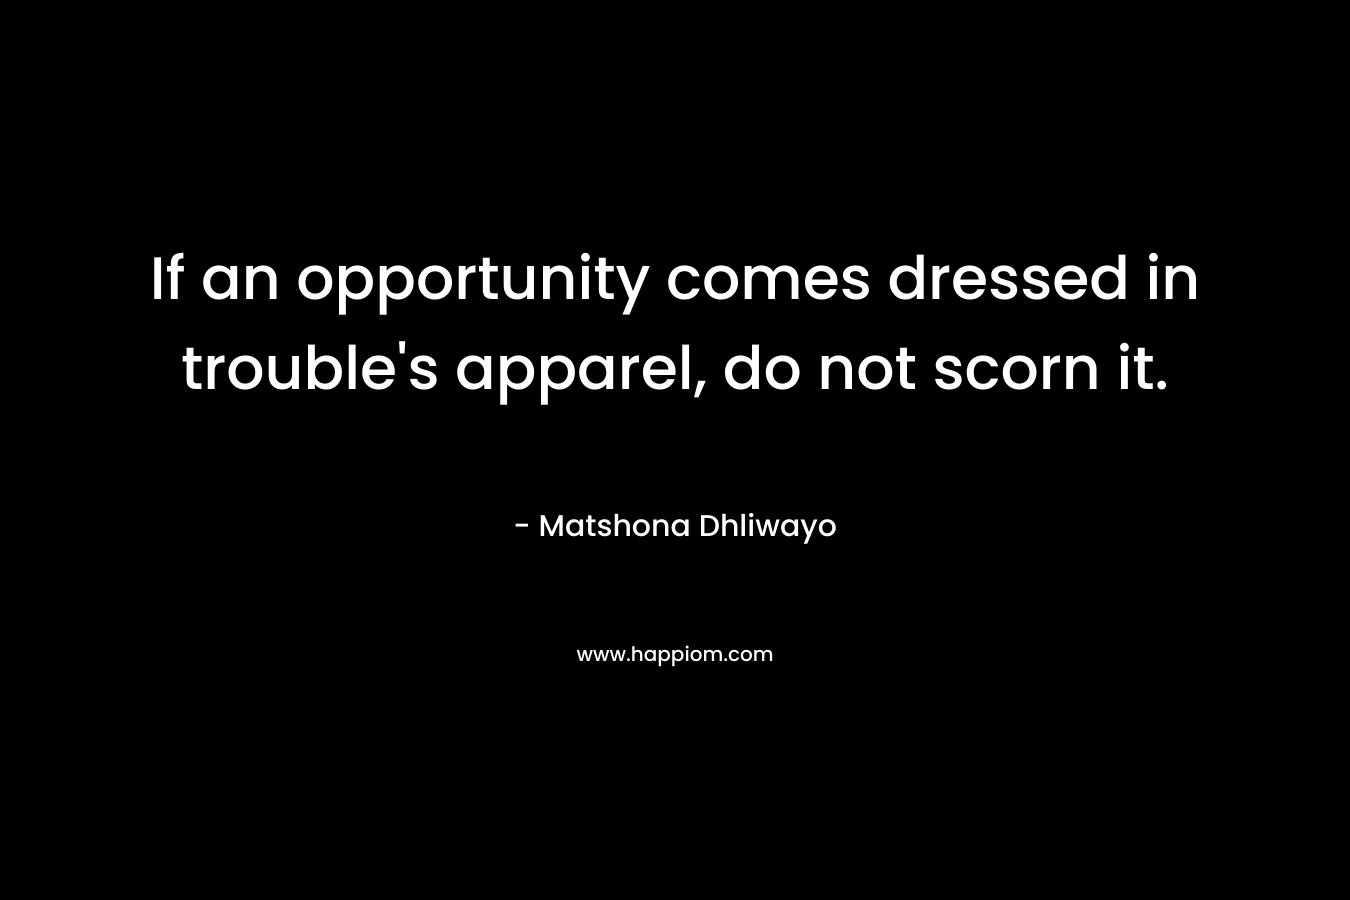 If an opportunity comes dressed in trouble’s apparel, do not scorn it. – Matshona Dhliwayo